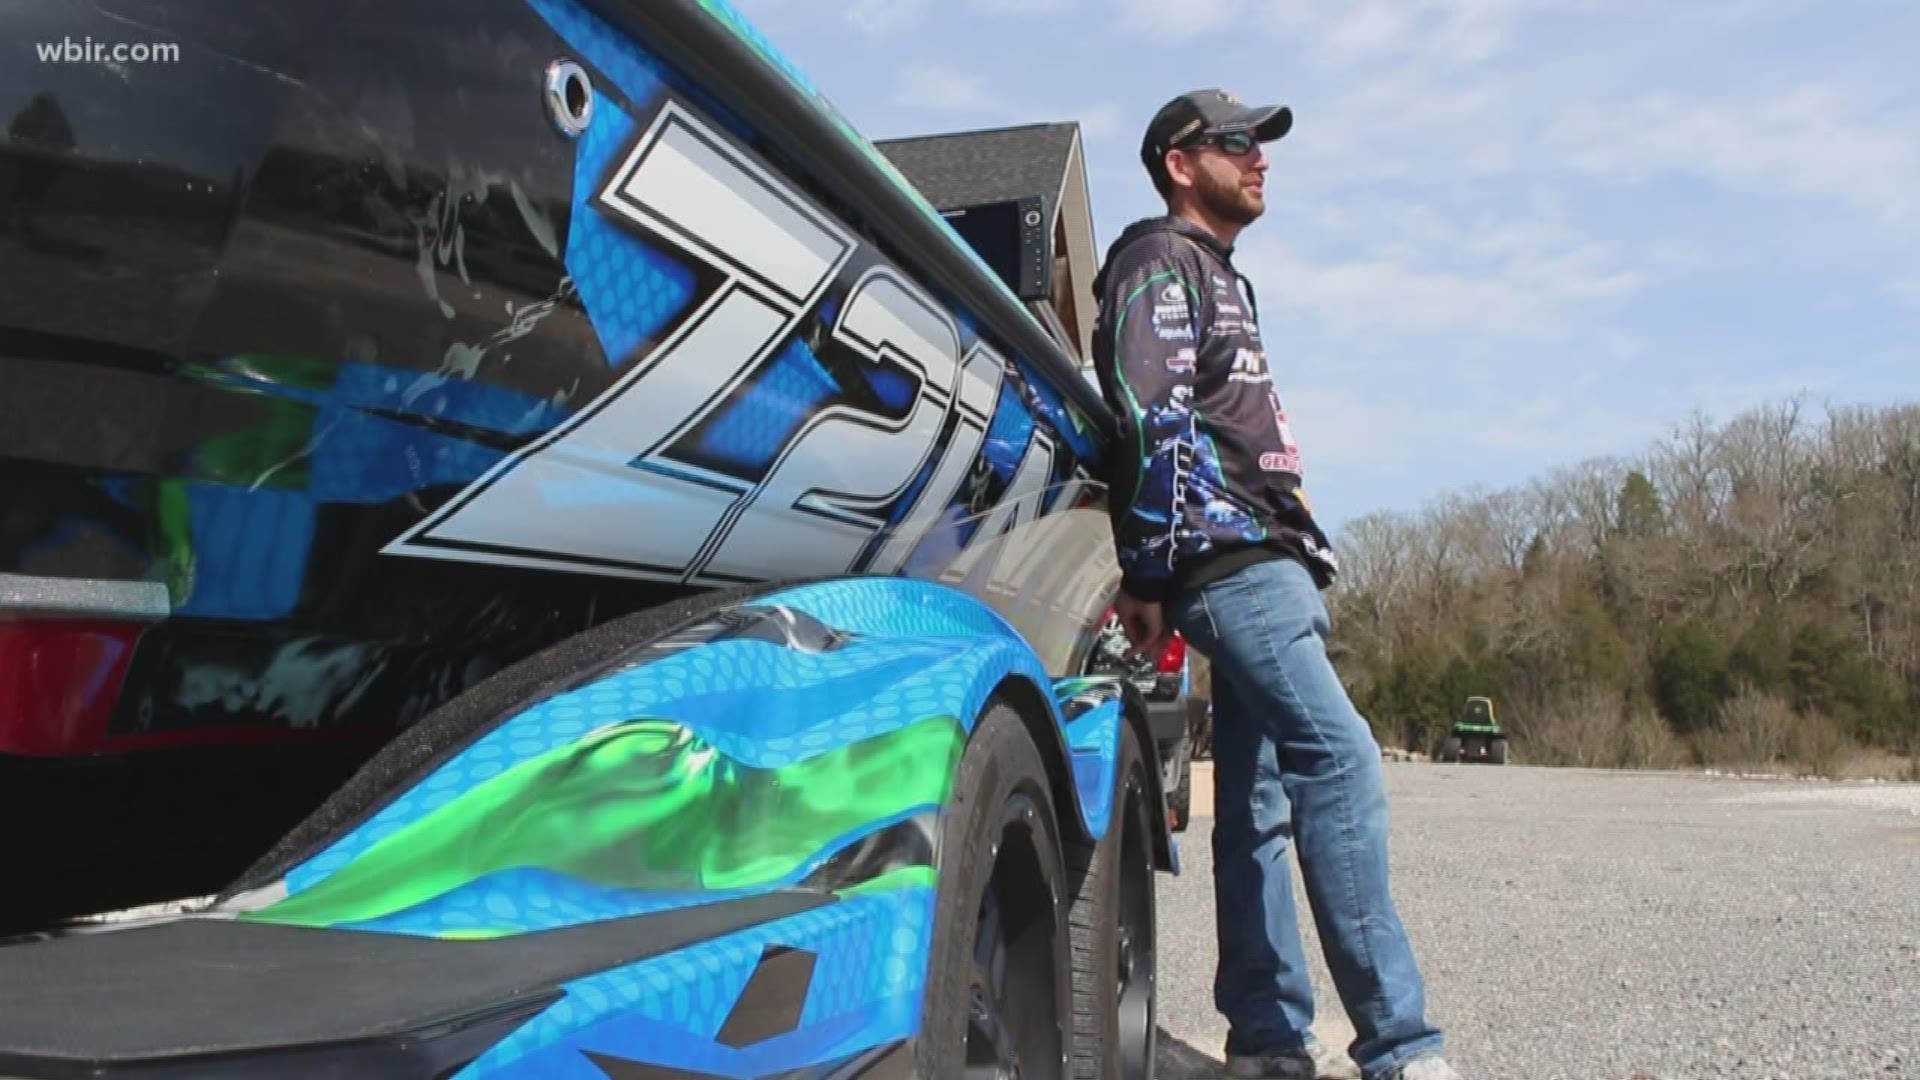 Bassmaster Classic comes to Knoxville next week. 10News reporter Marc Sallinger talks to a local angler who is competing in the tournament.